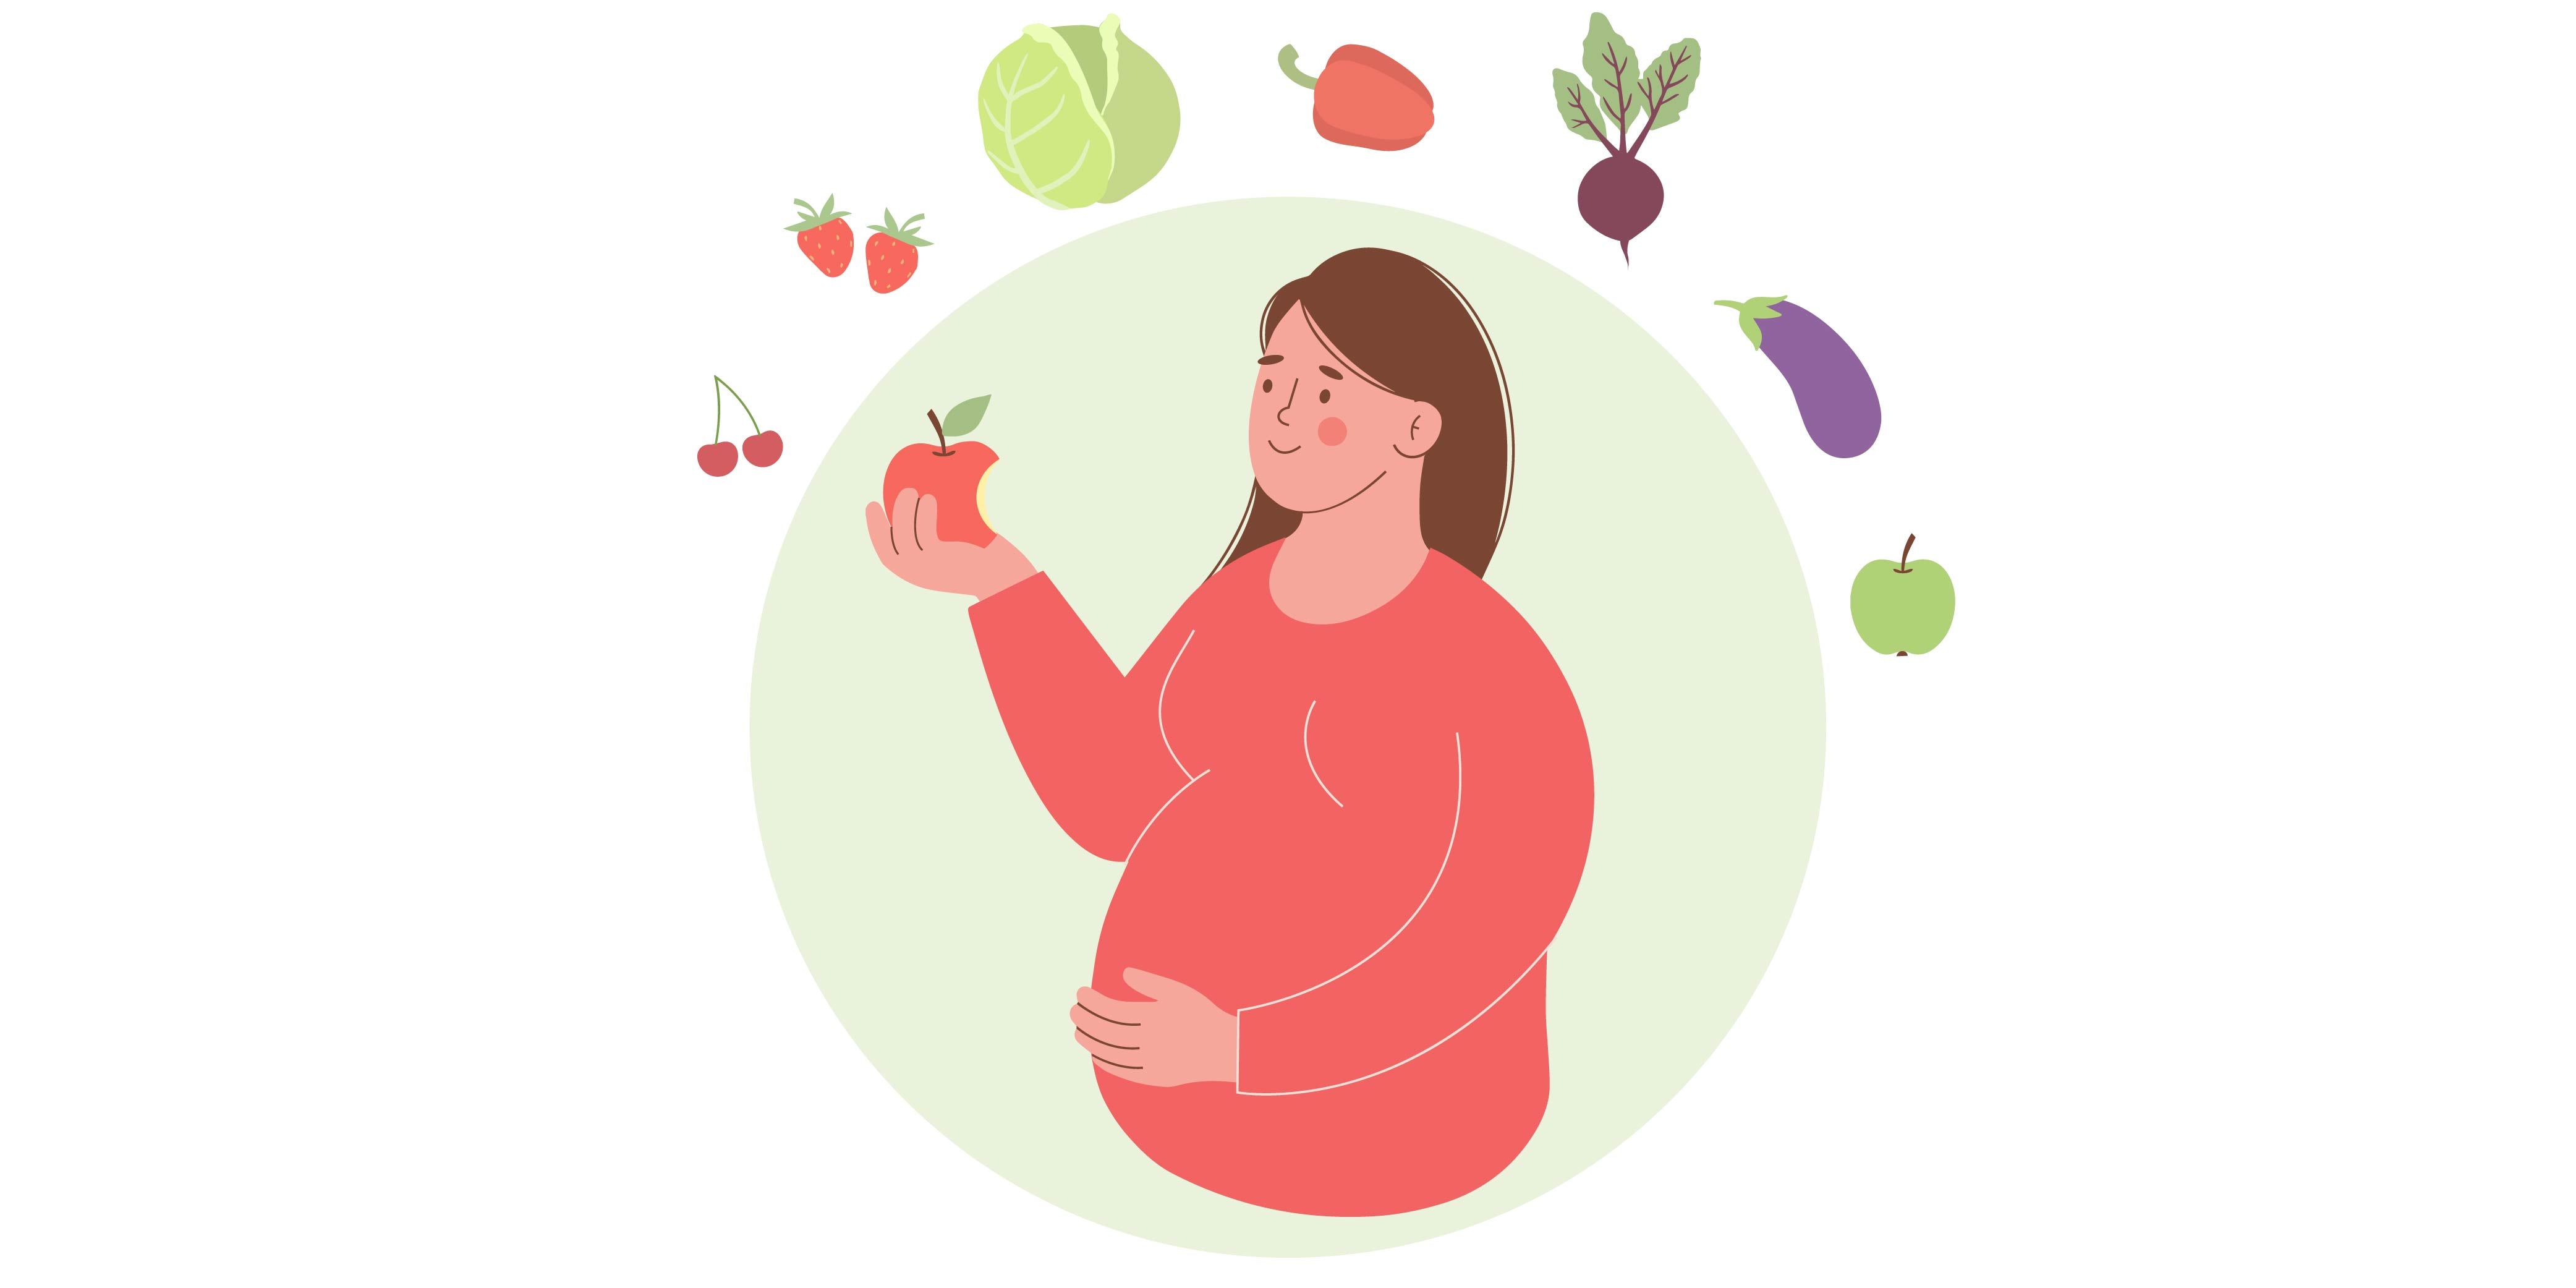 a sample diet for the days of pregnancy